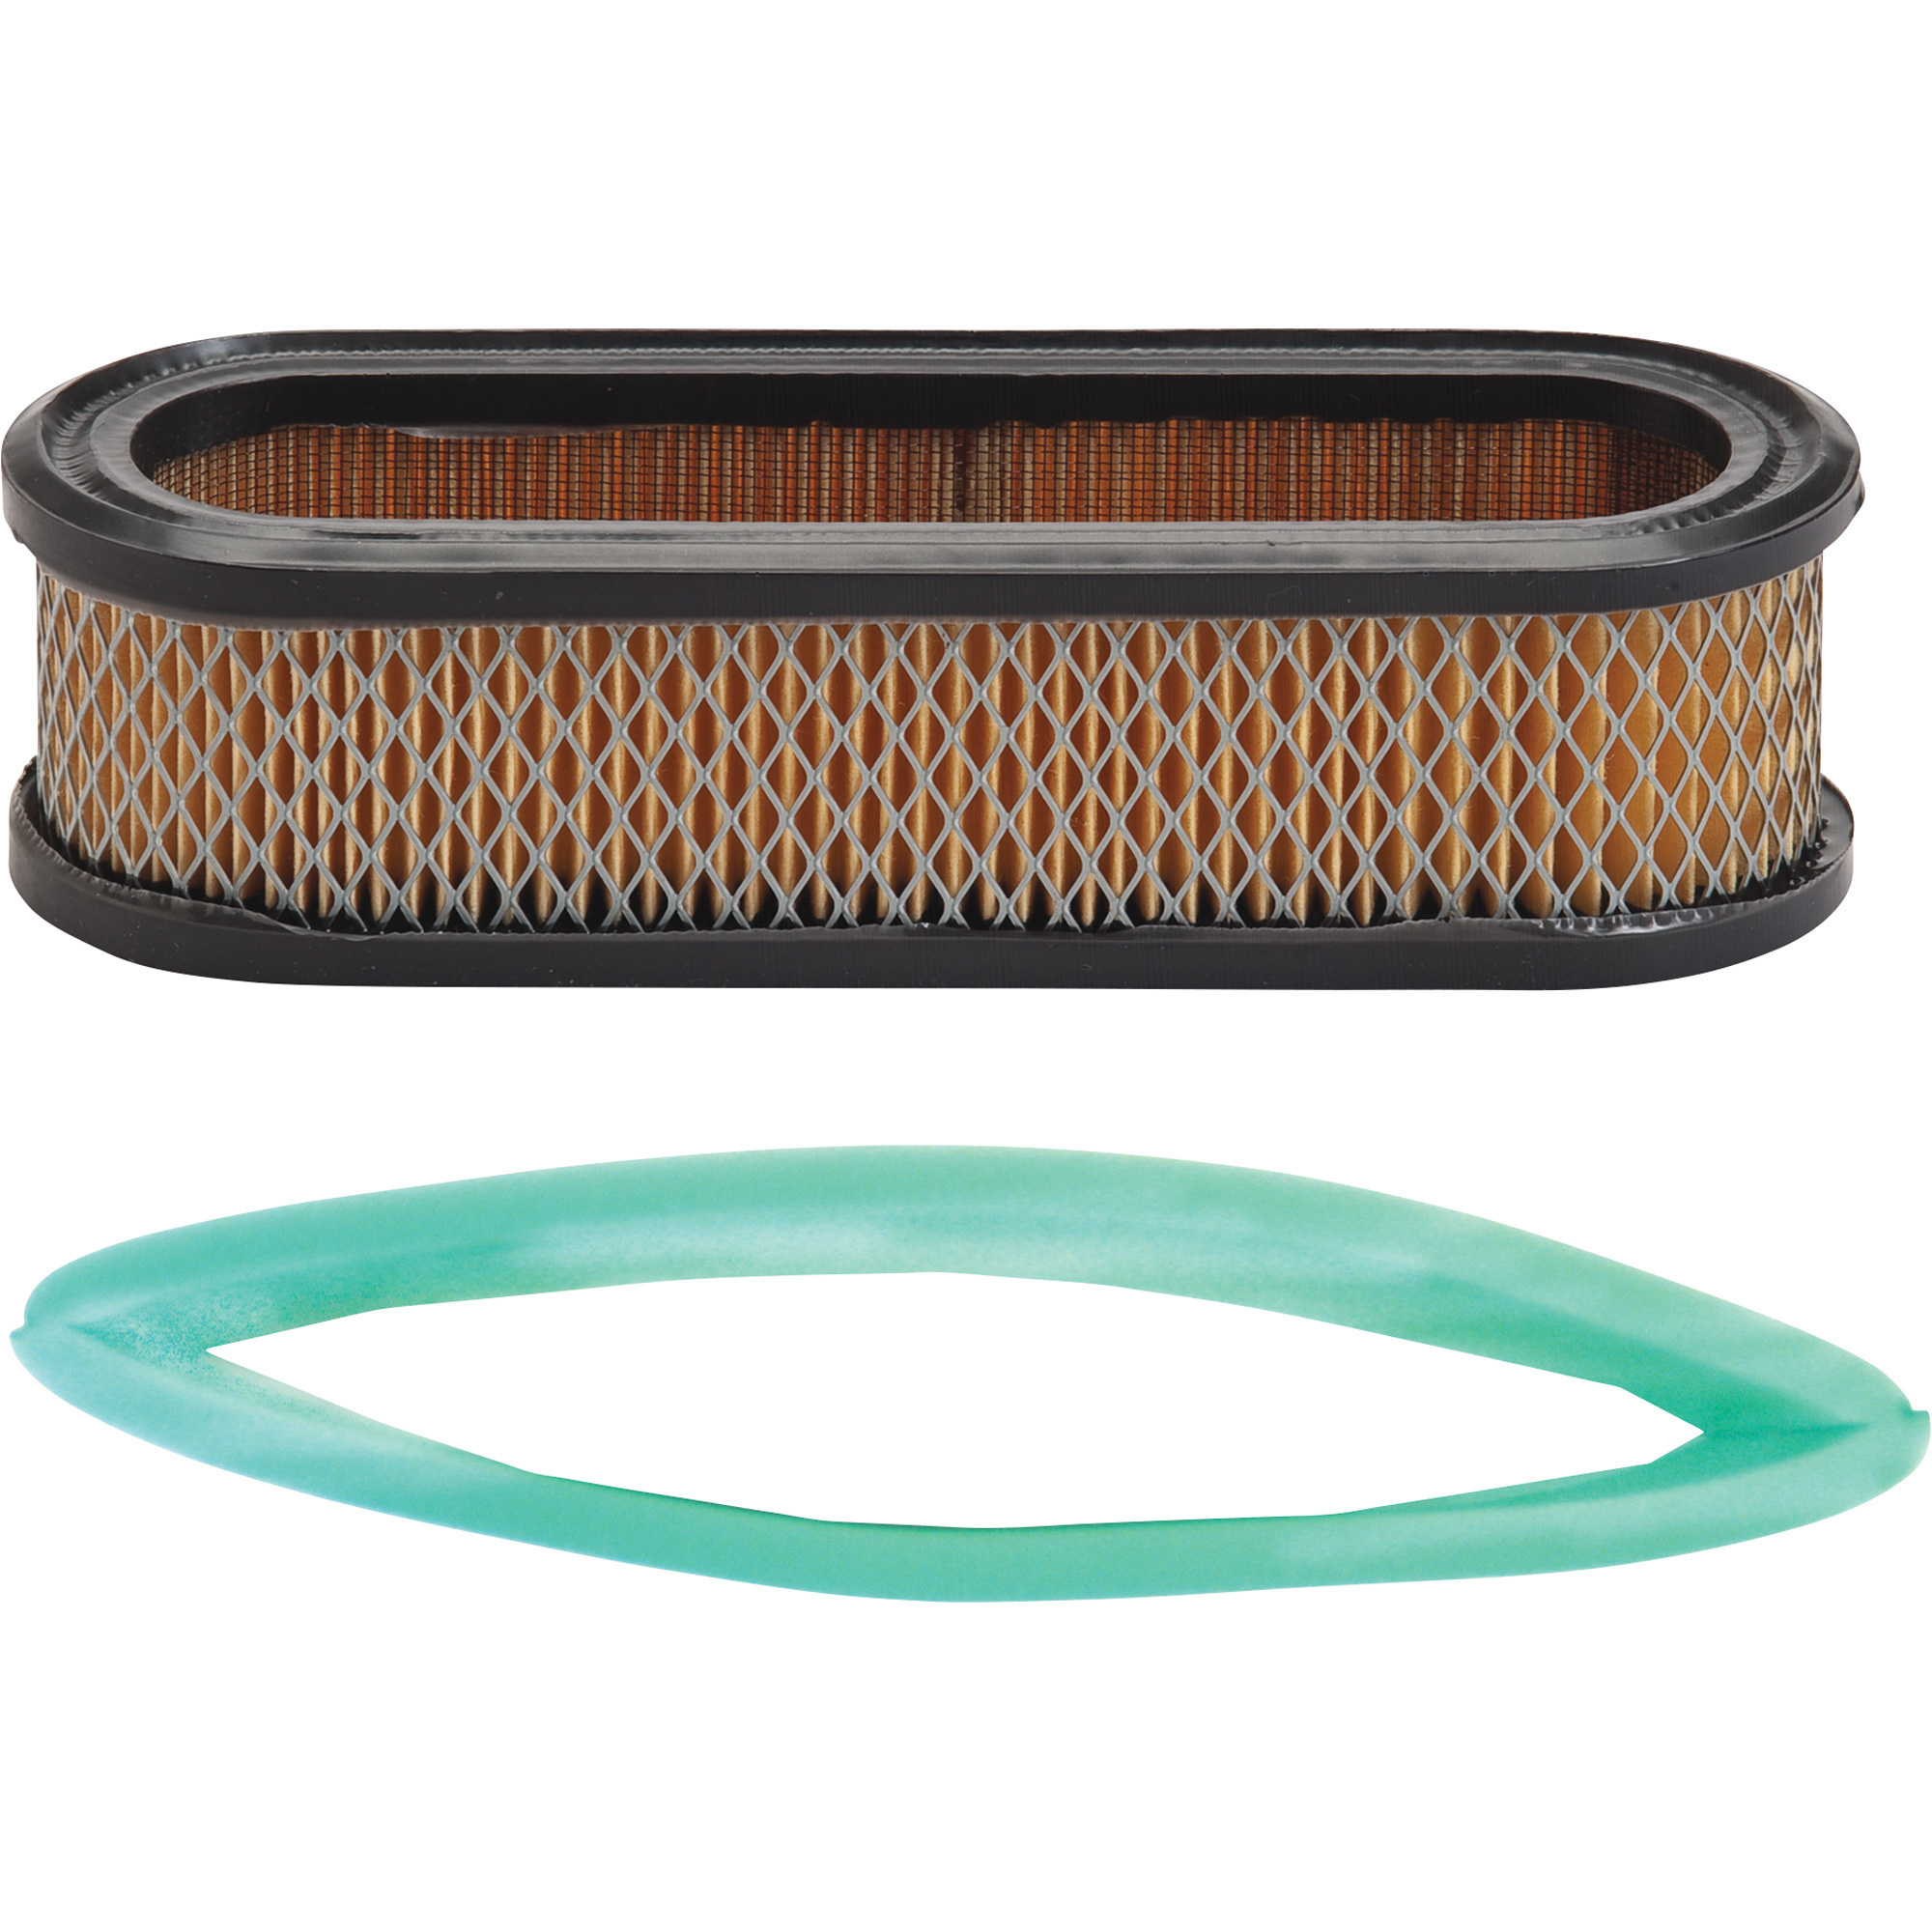 Oregon Air Filter and Pre-Cleaner Kit, Replacement for Briggs & Stratton OEM Part#s 394018S and 272490S, Model 30-104CSK